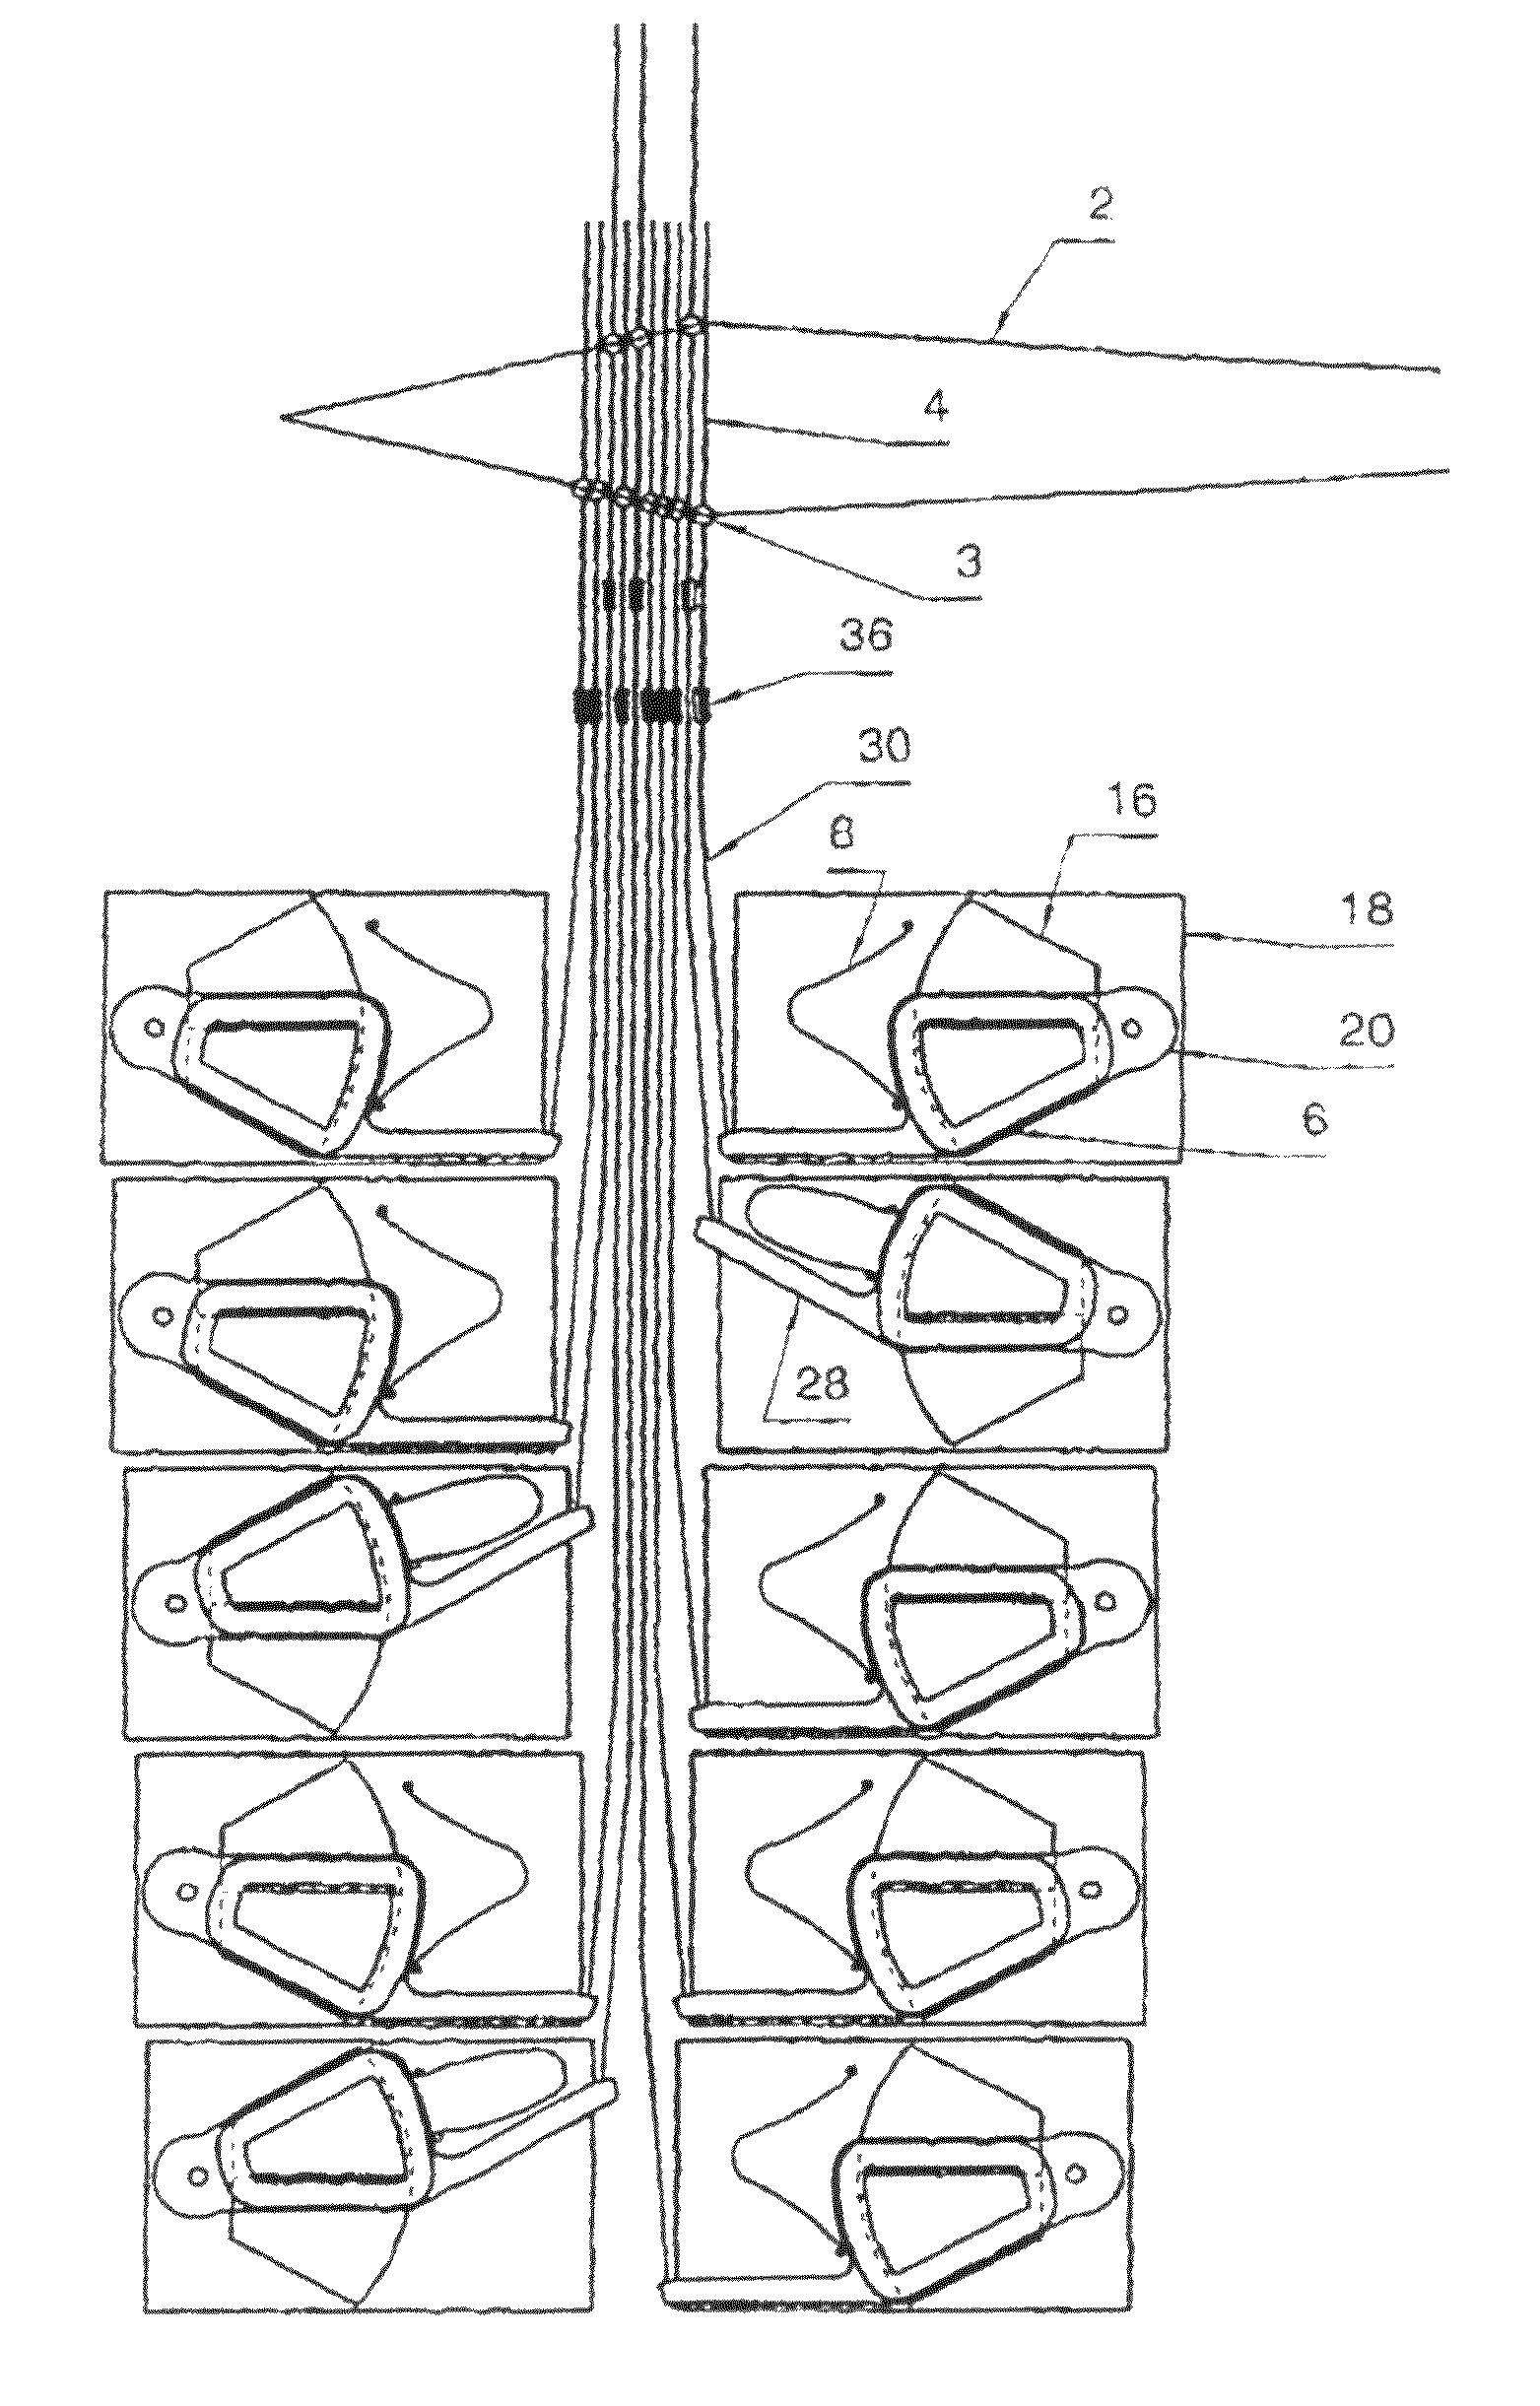 Device for controlling the transverse movement of the warp threads of a textile weaving machine